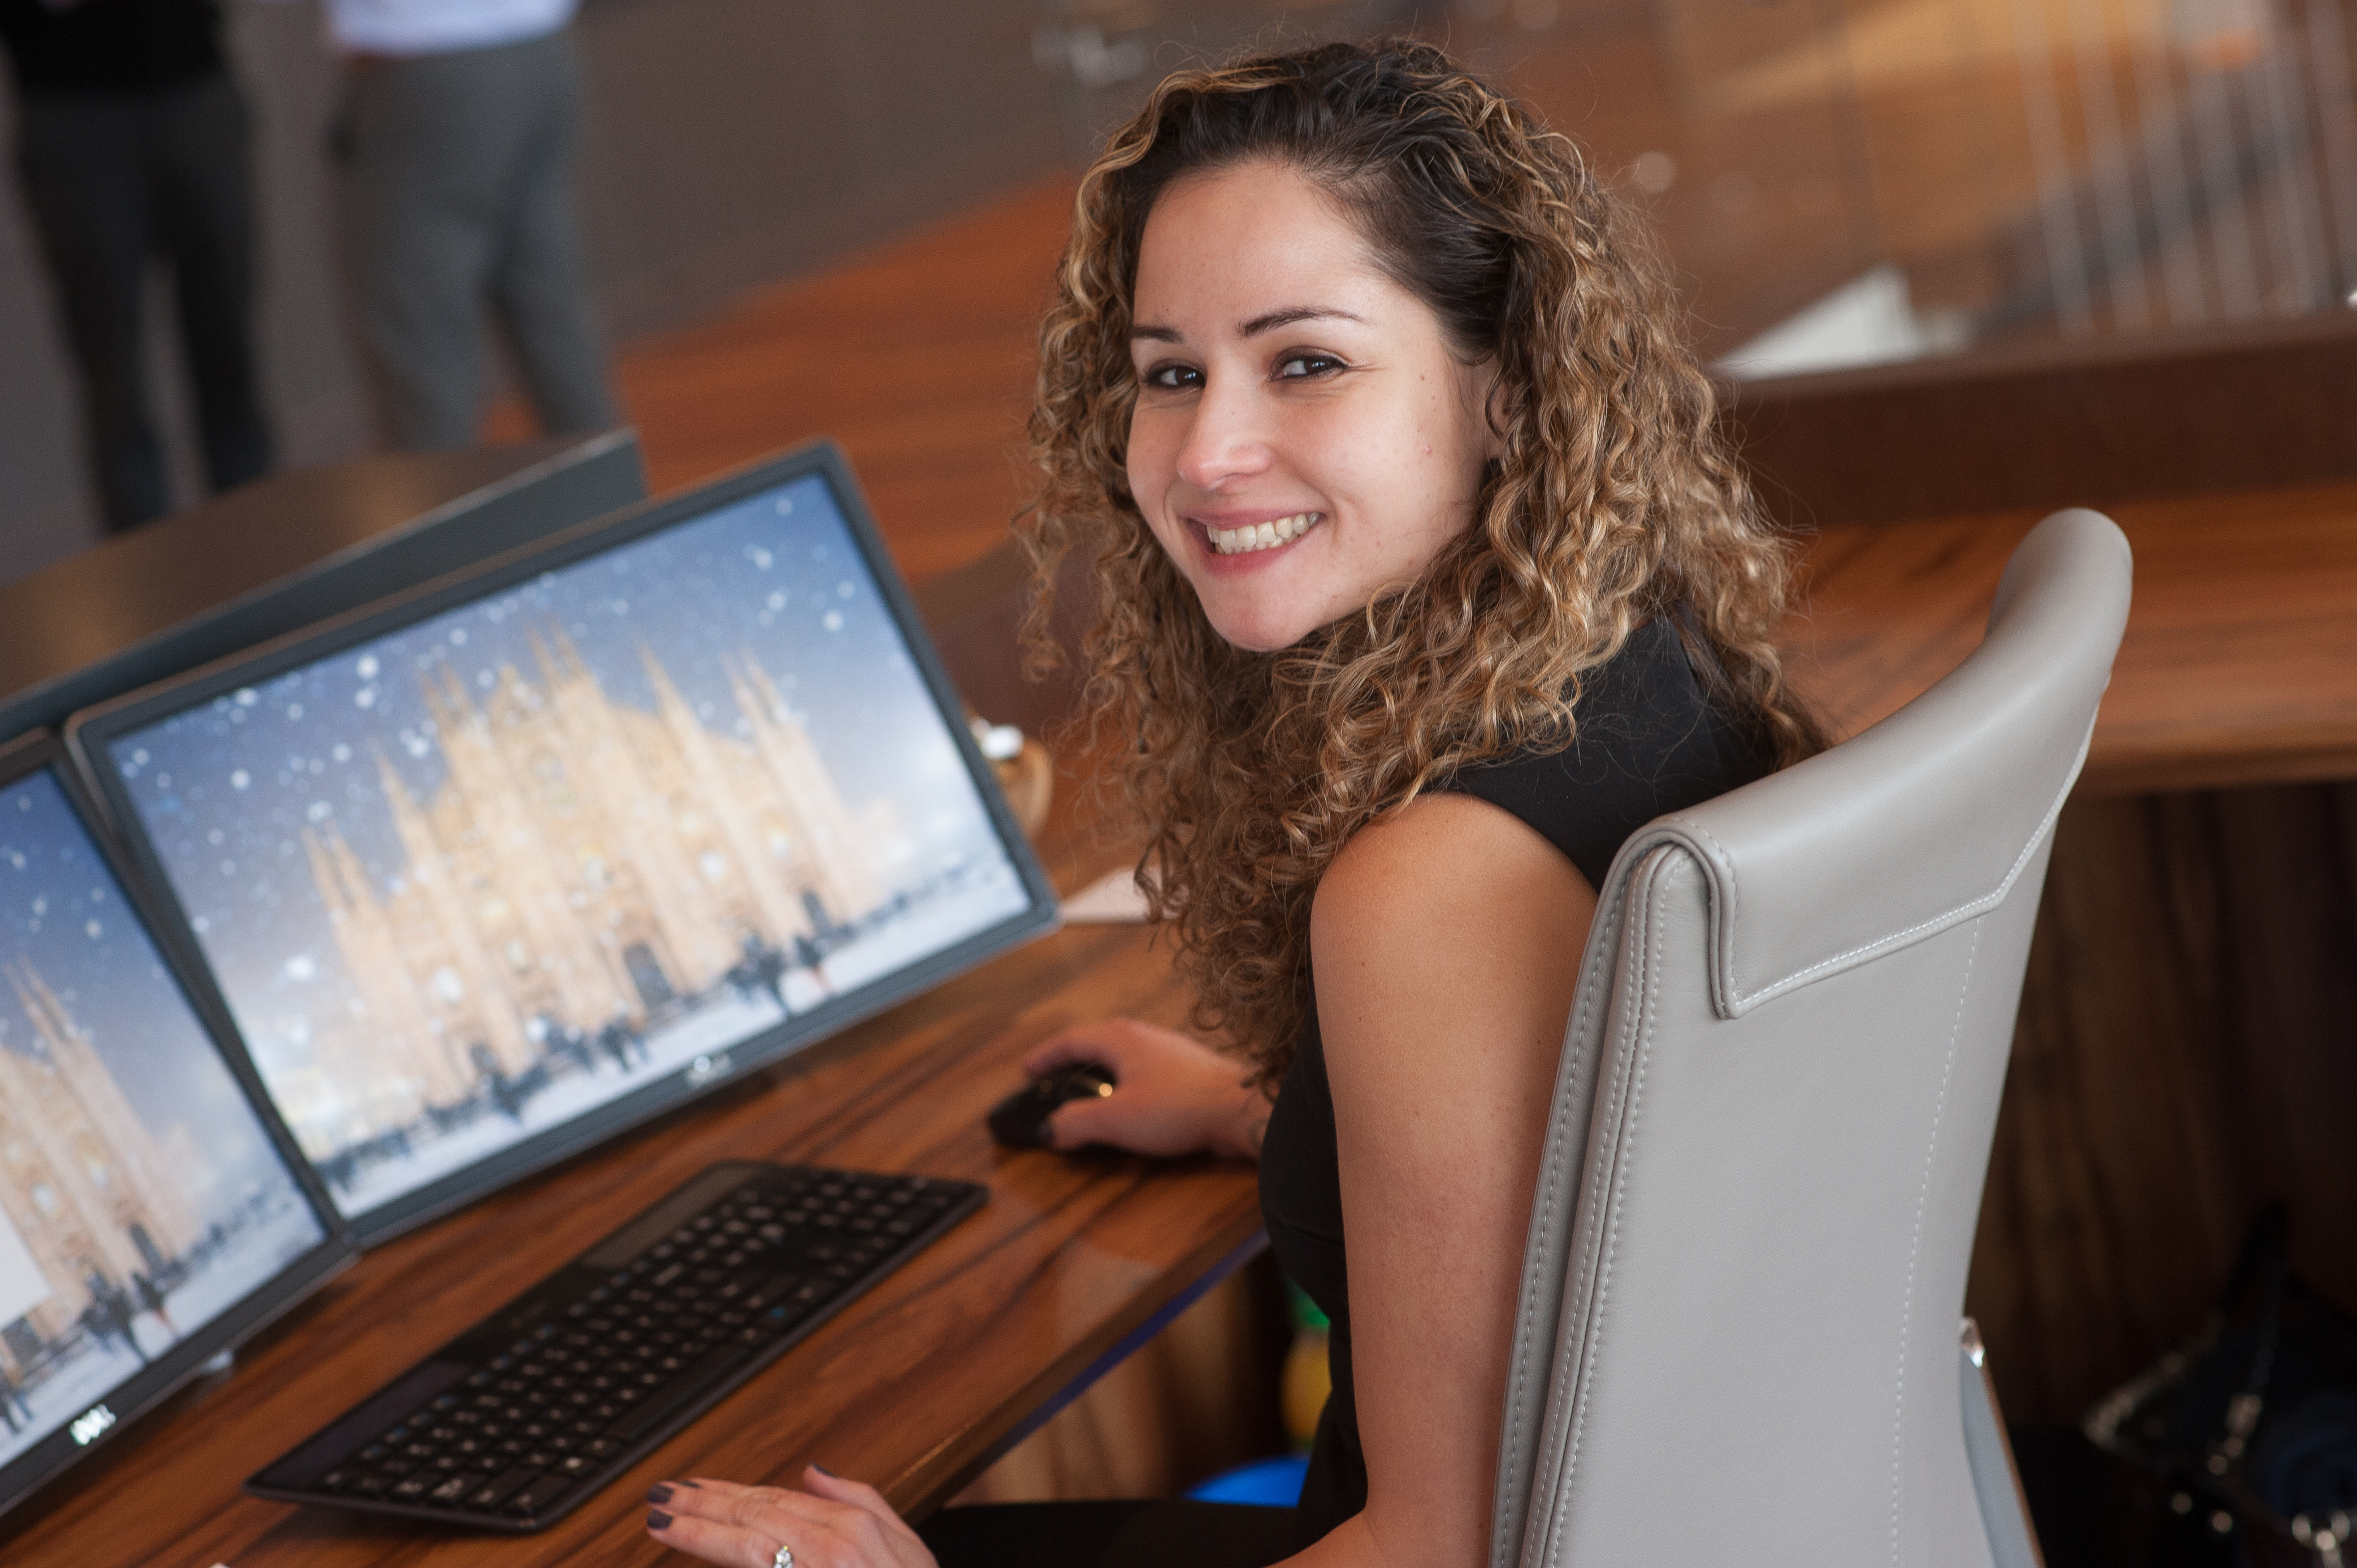 curly haired woman working in front of the computer smiling at the camera